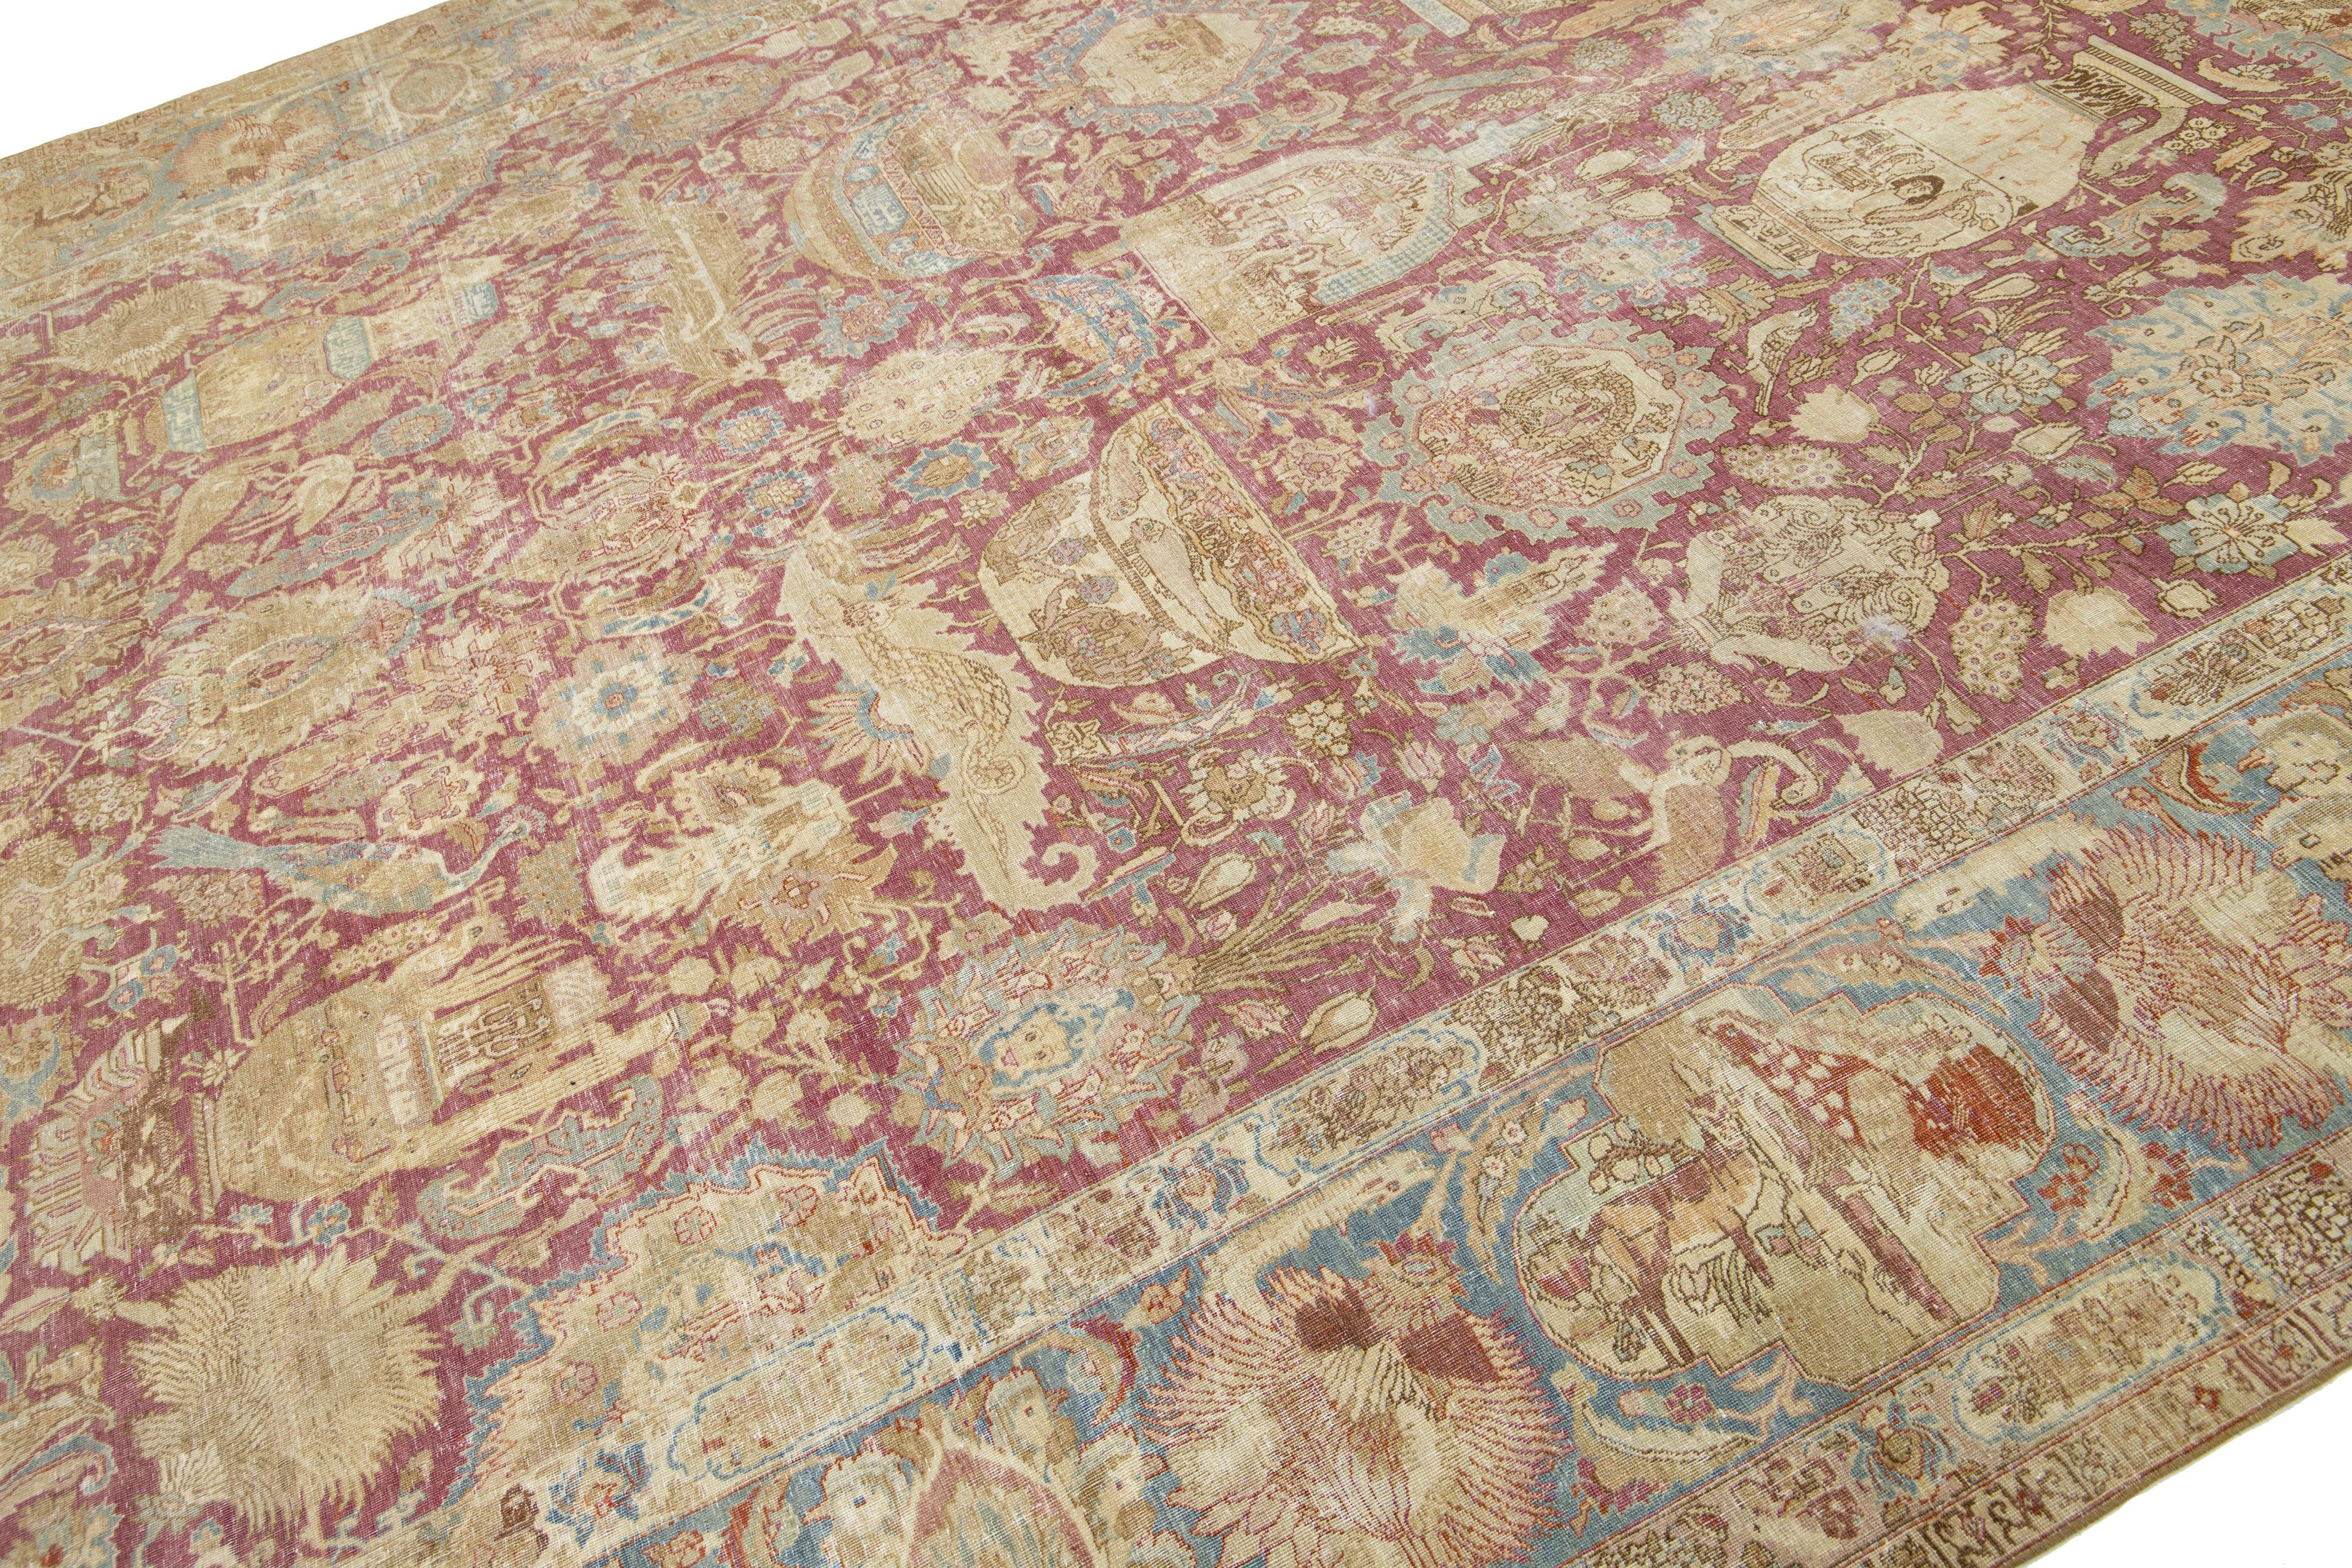 Hand-Knotted Antique Persian Tabriz Wool Rug with Red Allover Design from the 1900s For Sale